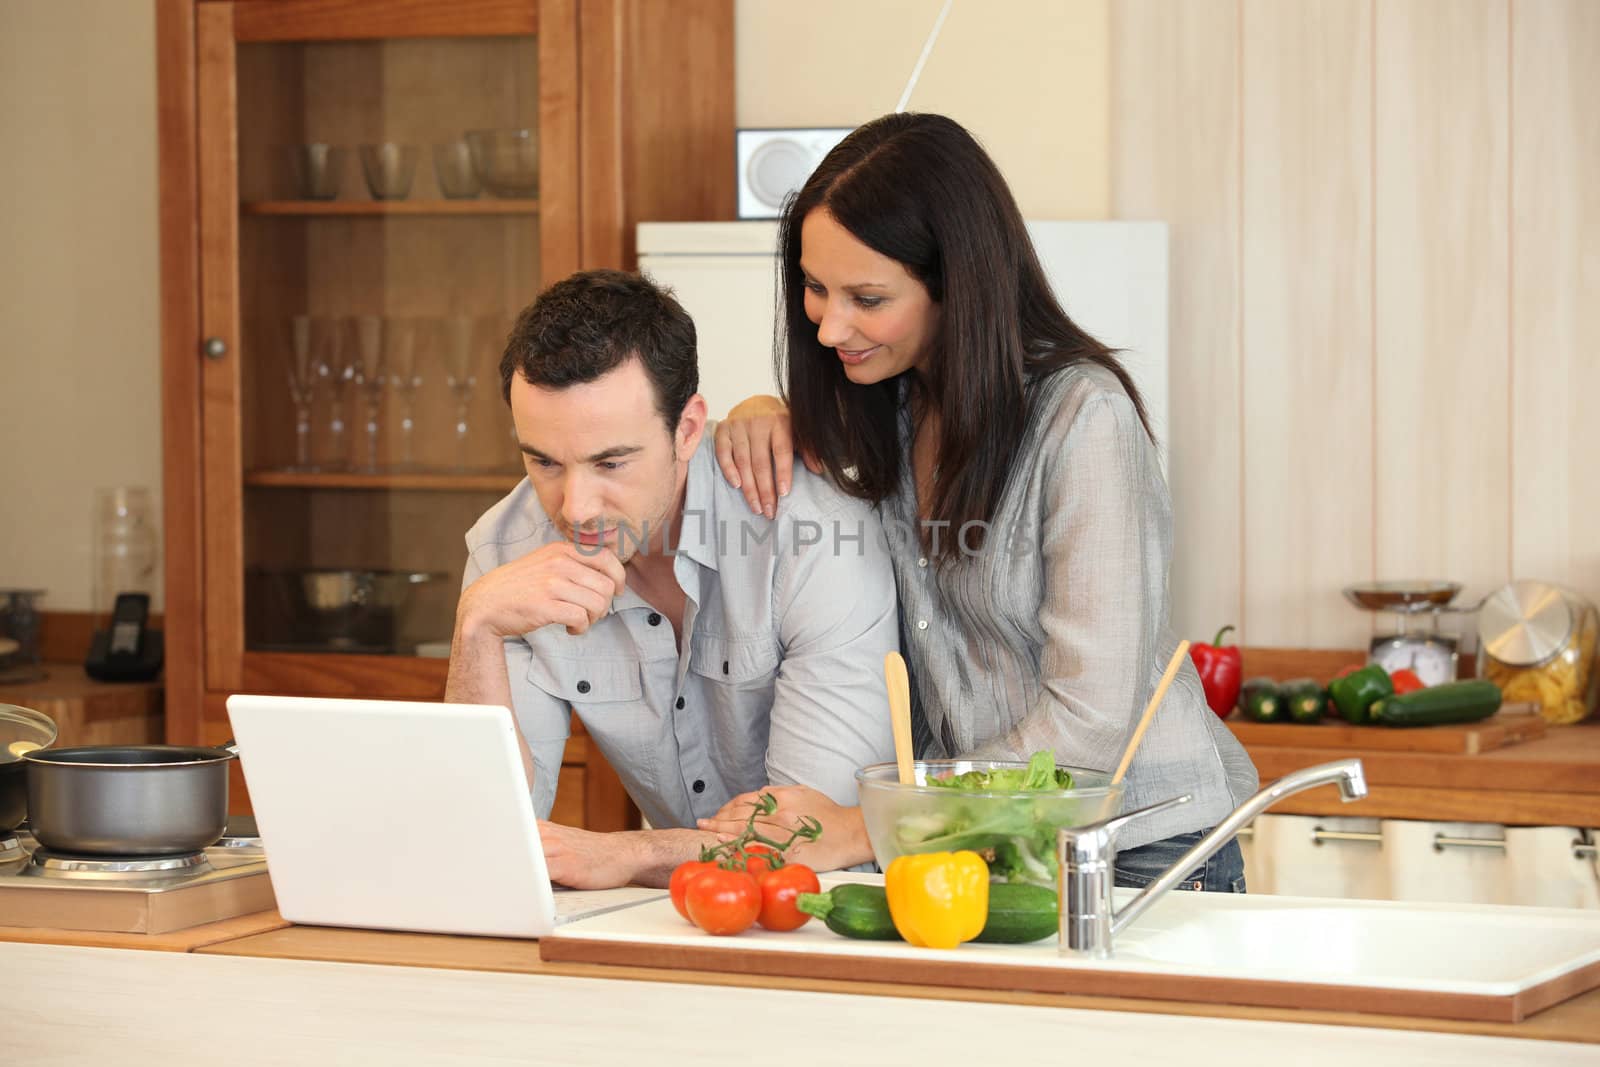 Couple looking at a laptop in their kitchen